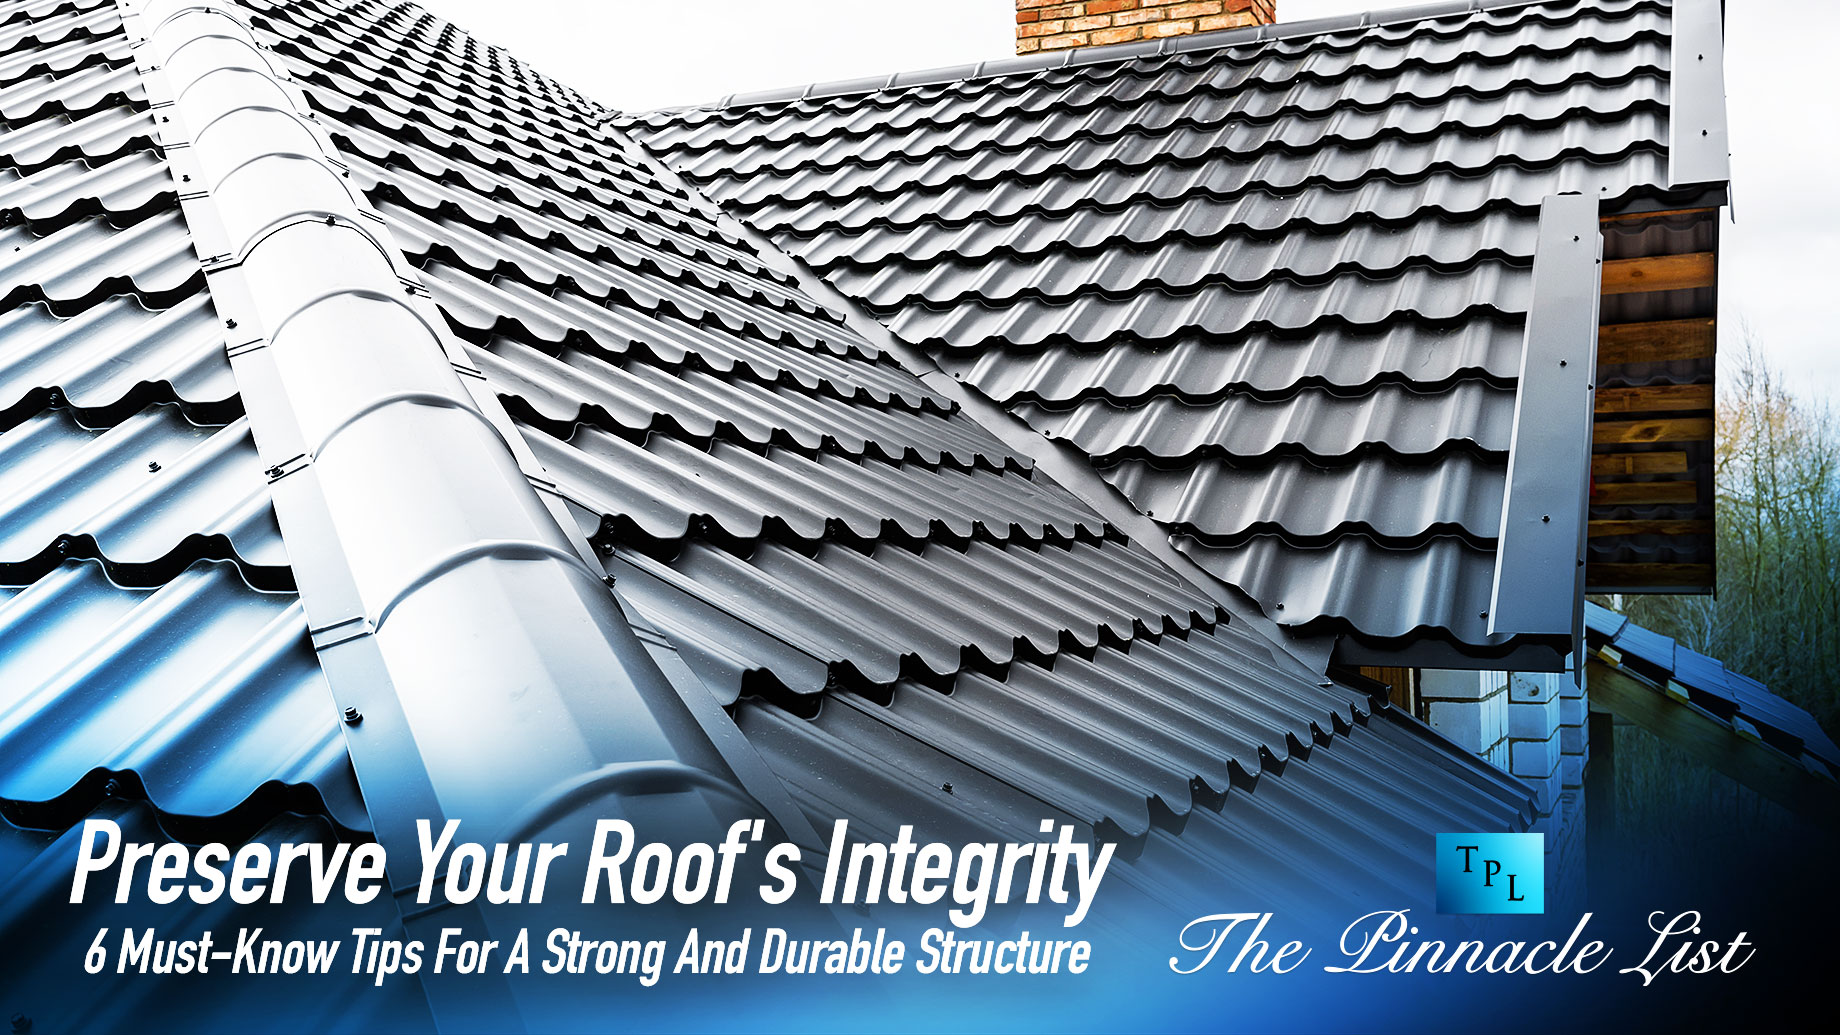 Preserve Your Roof's Integrity: 6 Must-Know Tips For A Strong And Durable Structure